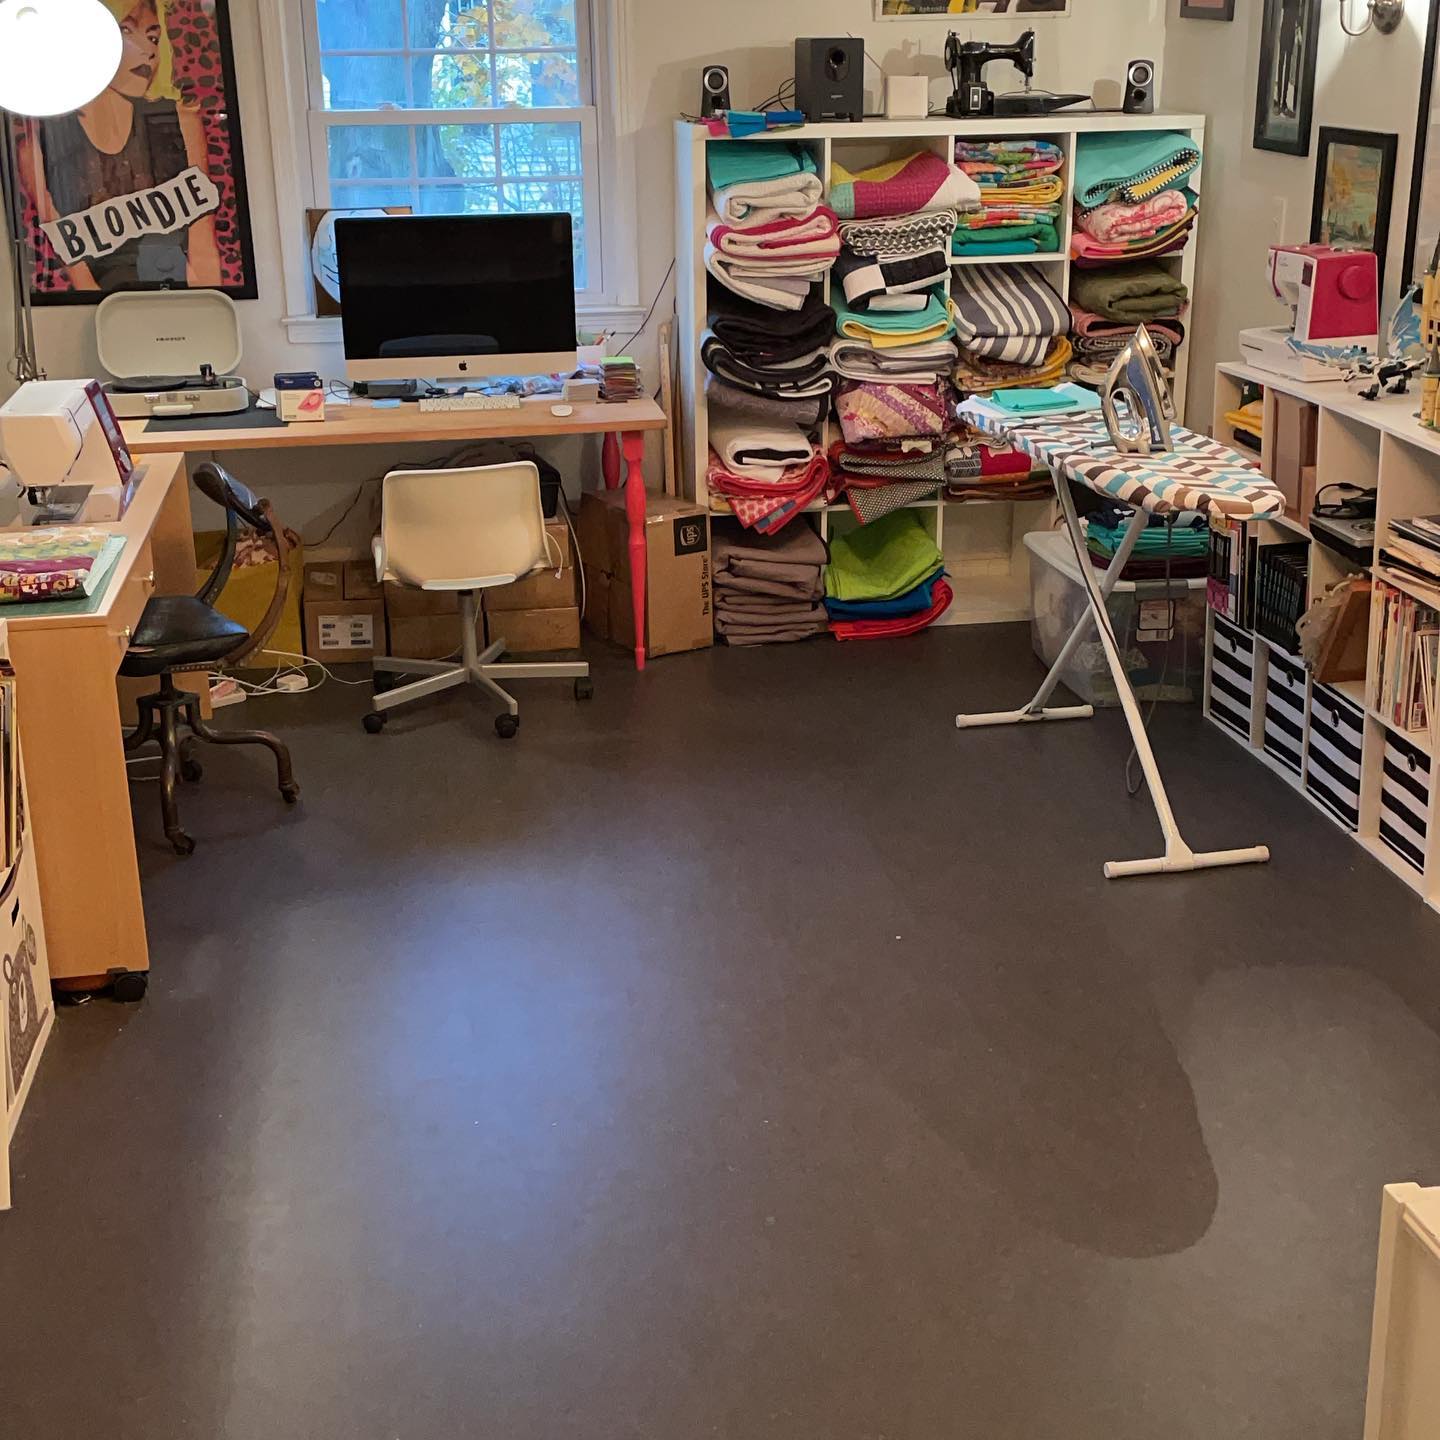 While I sometimes miss the longarm (thanks @handiquilter) my studio now feels enormous…